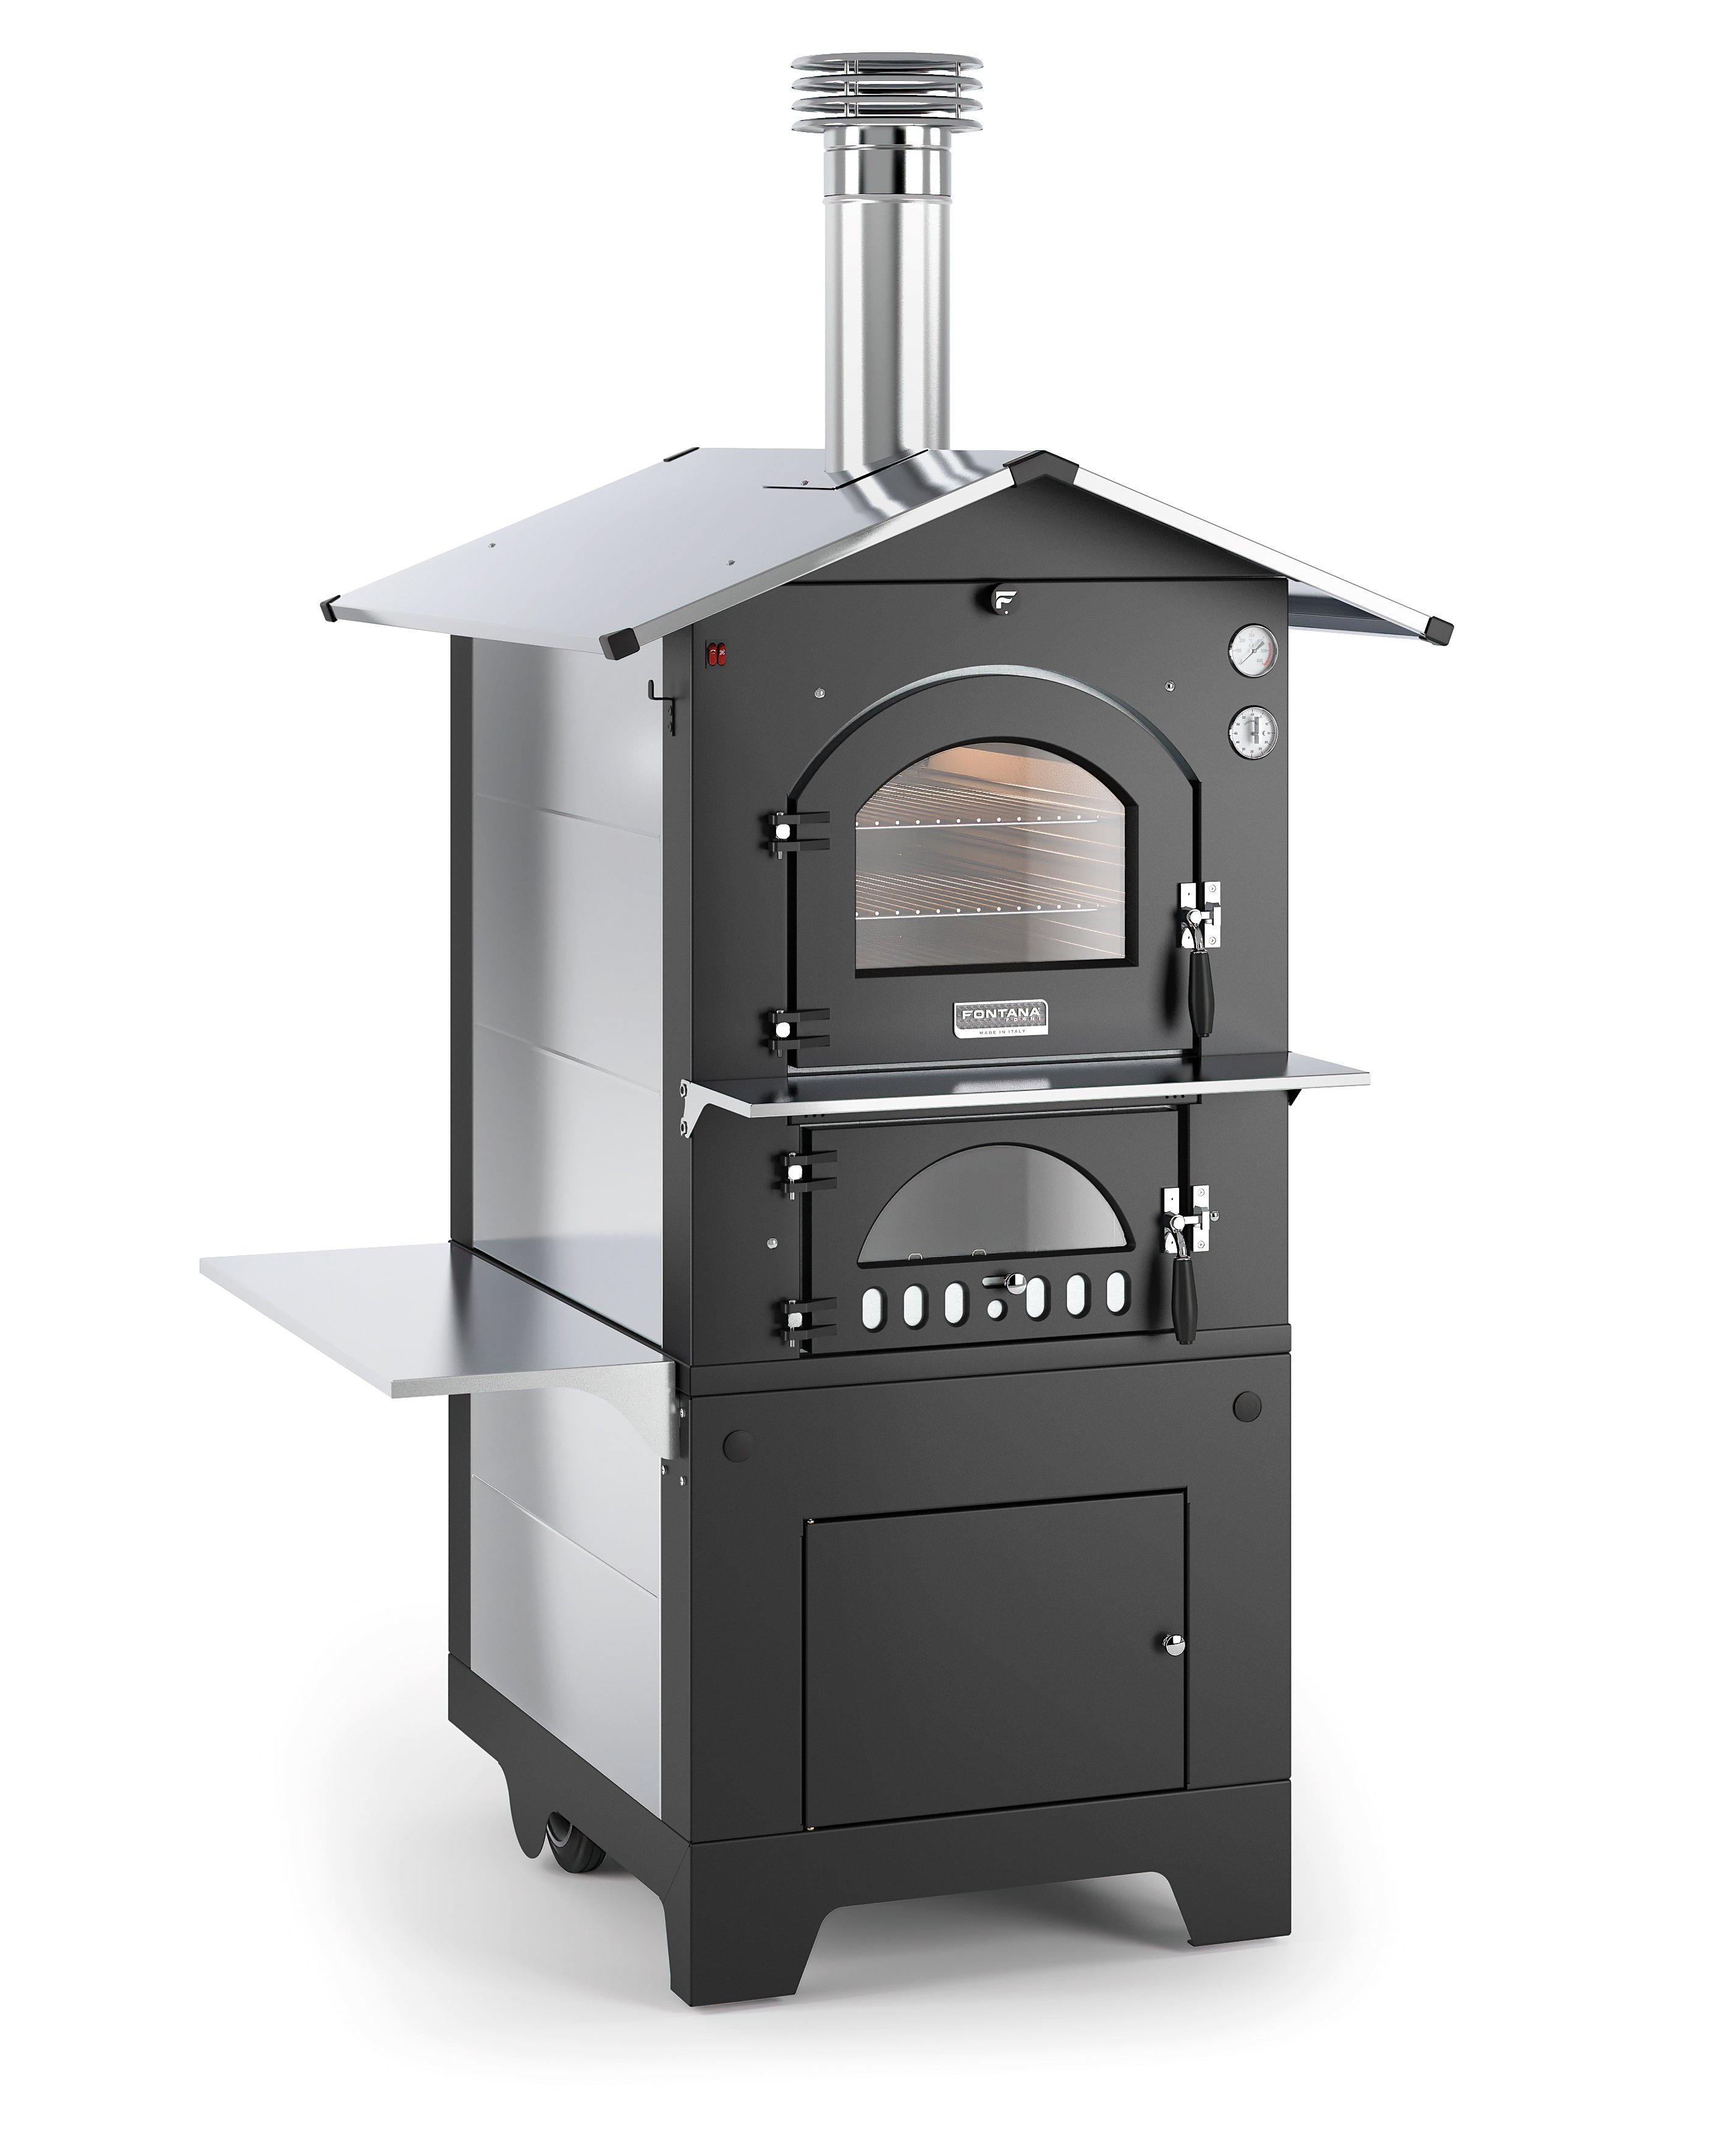 Bakehouse Fontana Gusto made of weatherproof stainless steel, indirect firing, three baking levels of 80x54cm each.